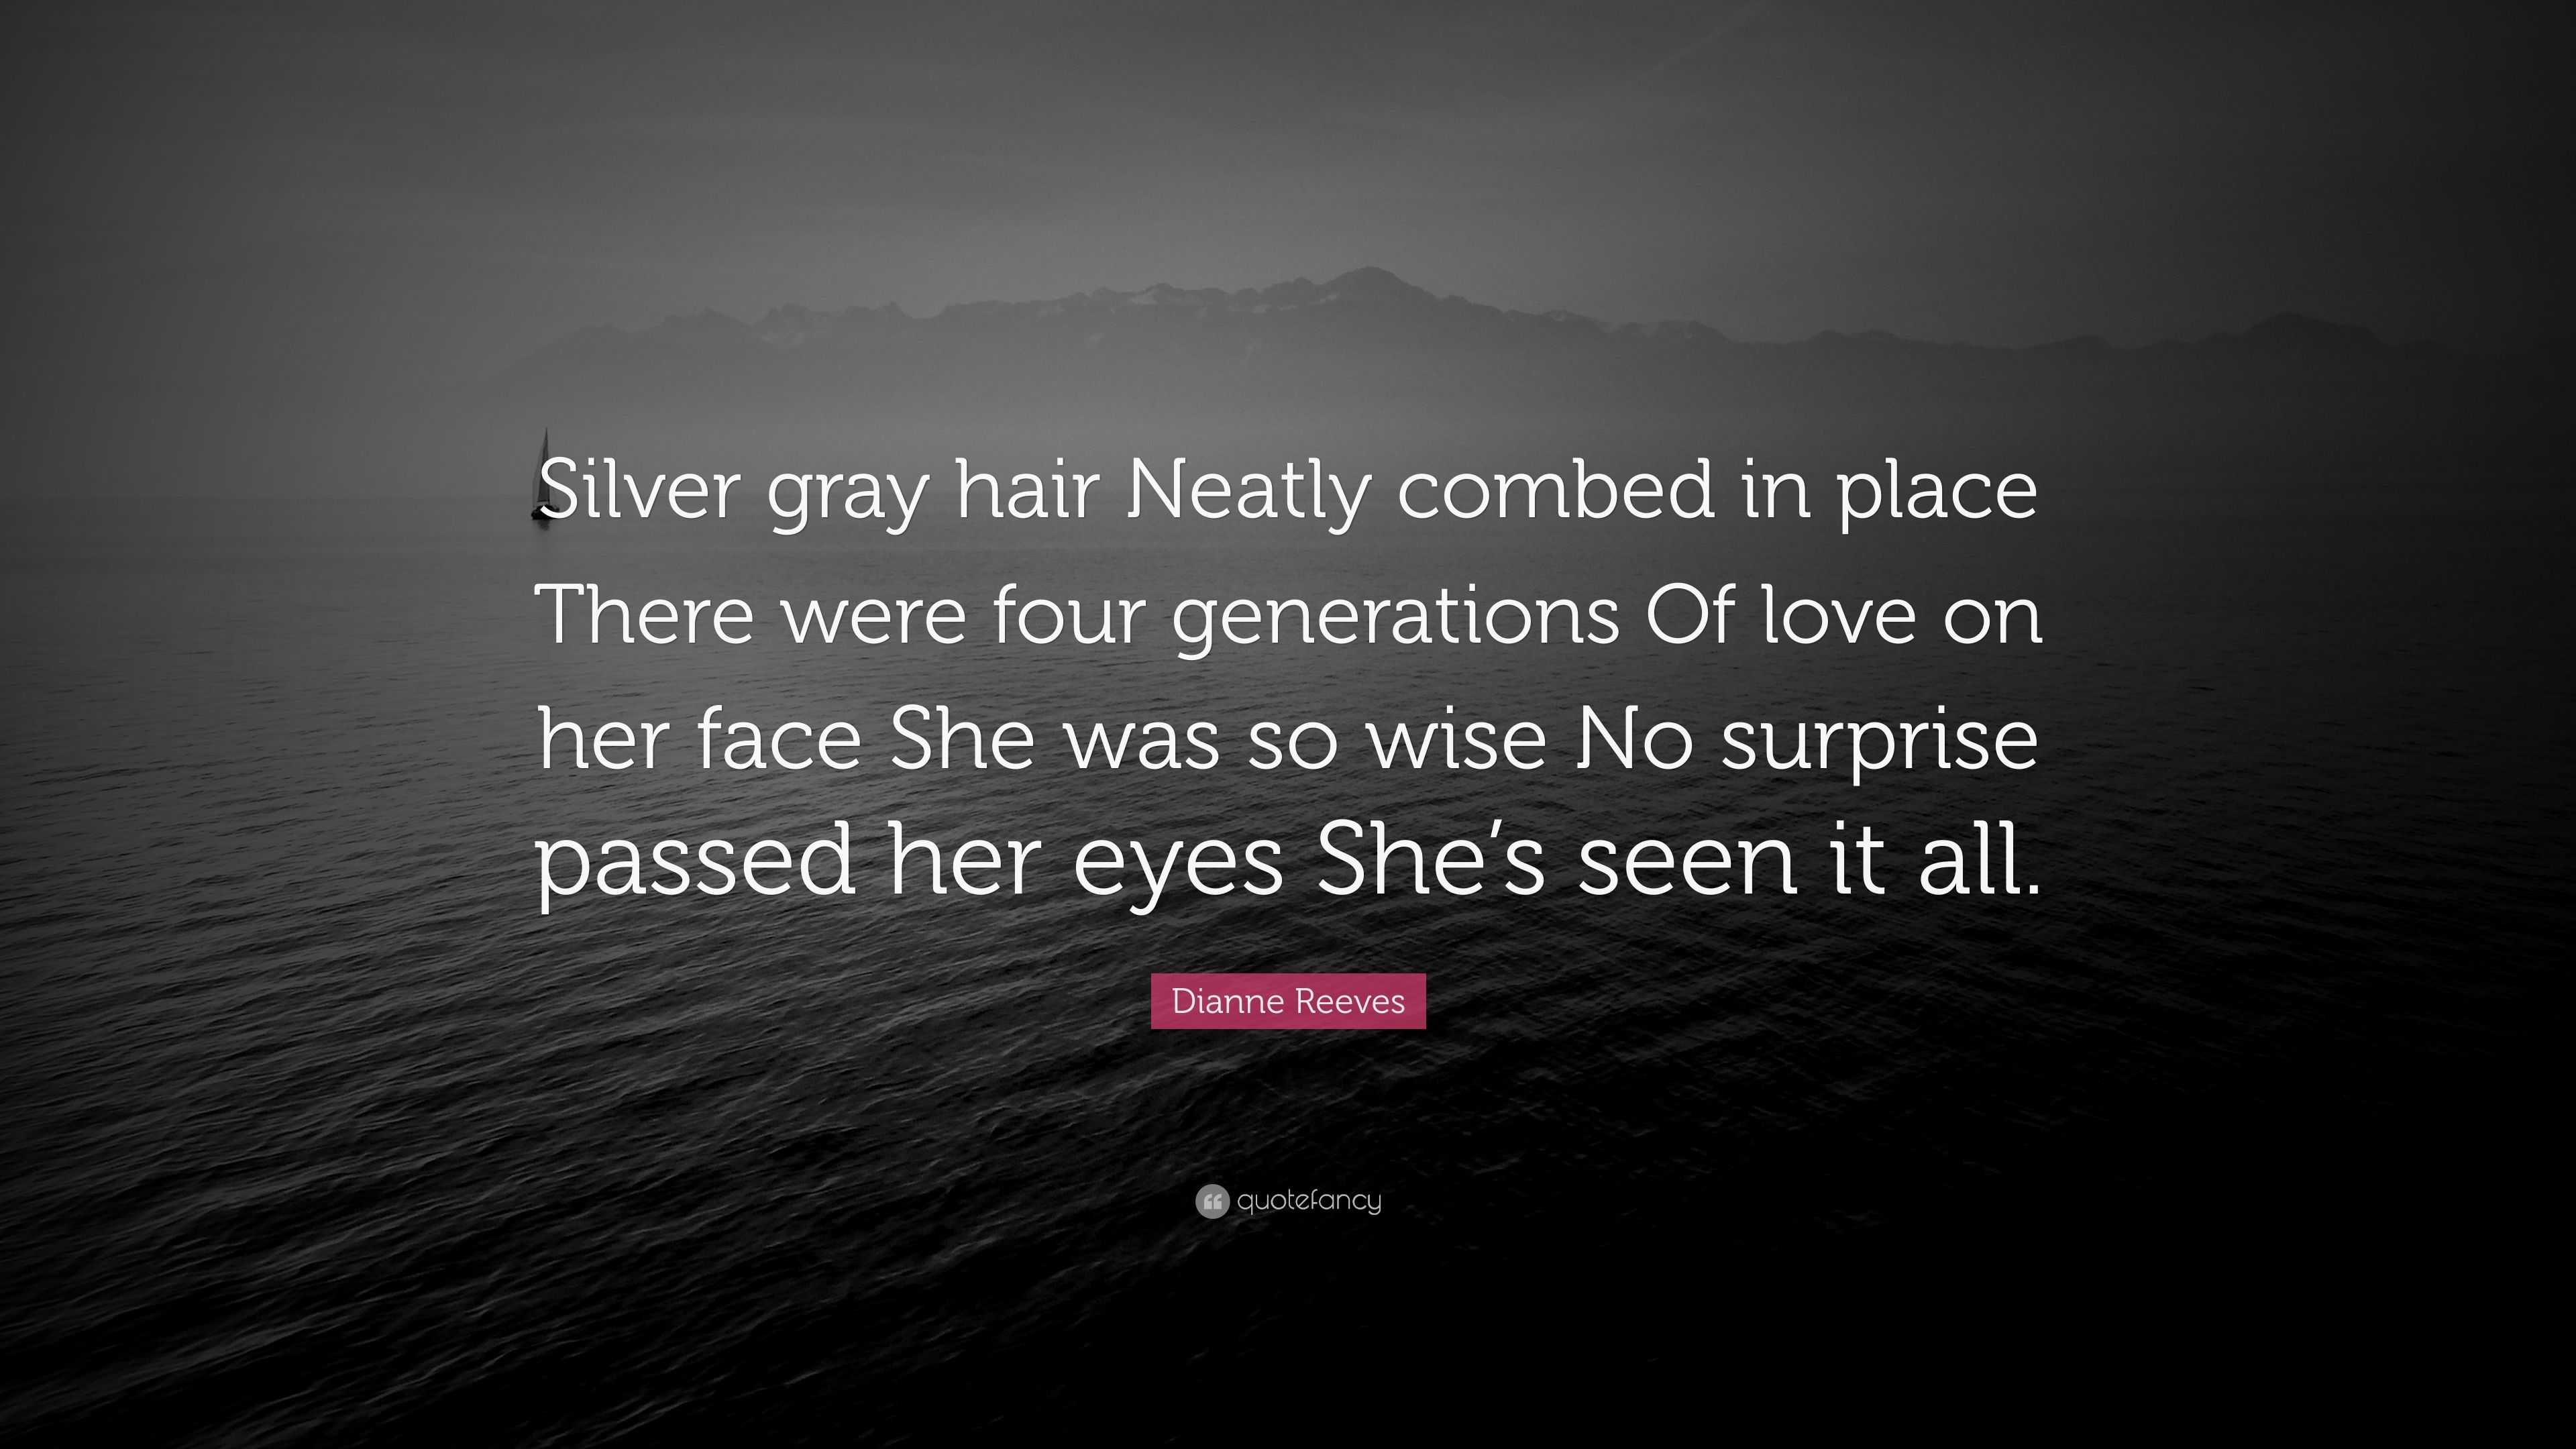 Dianne Reeves Quote: “Silver gray hair Neatly combed in place There were  four generations Of love on her face She was so wise No surprise pass...”